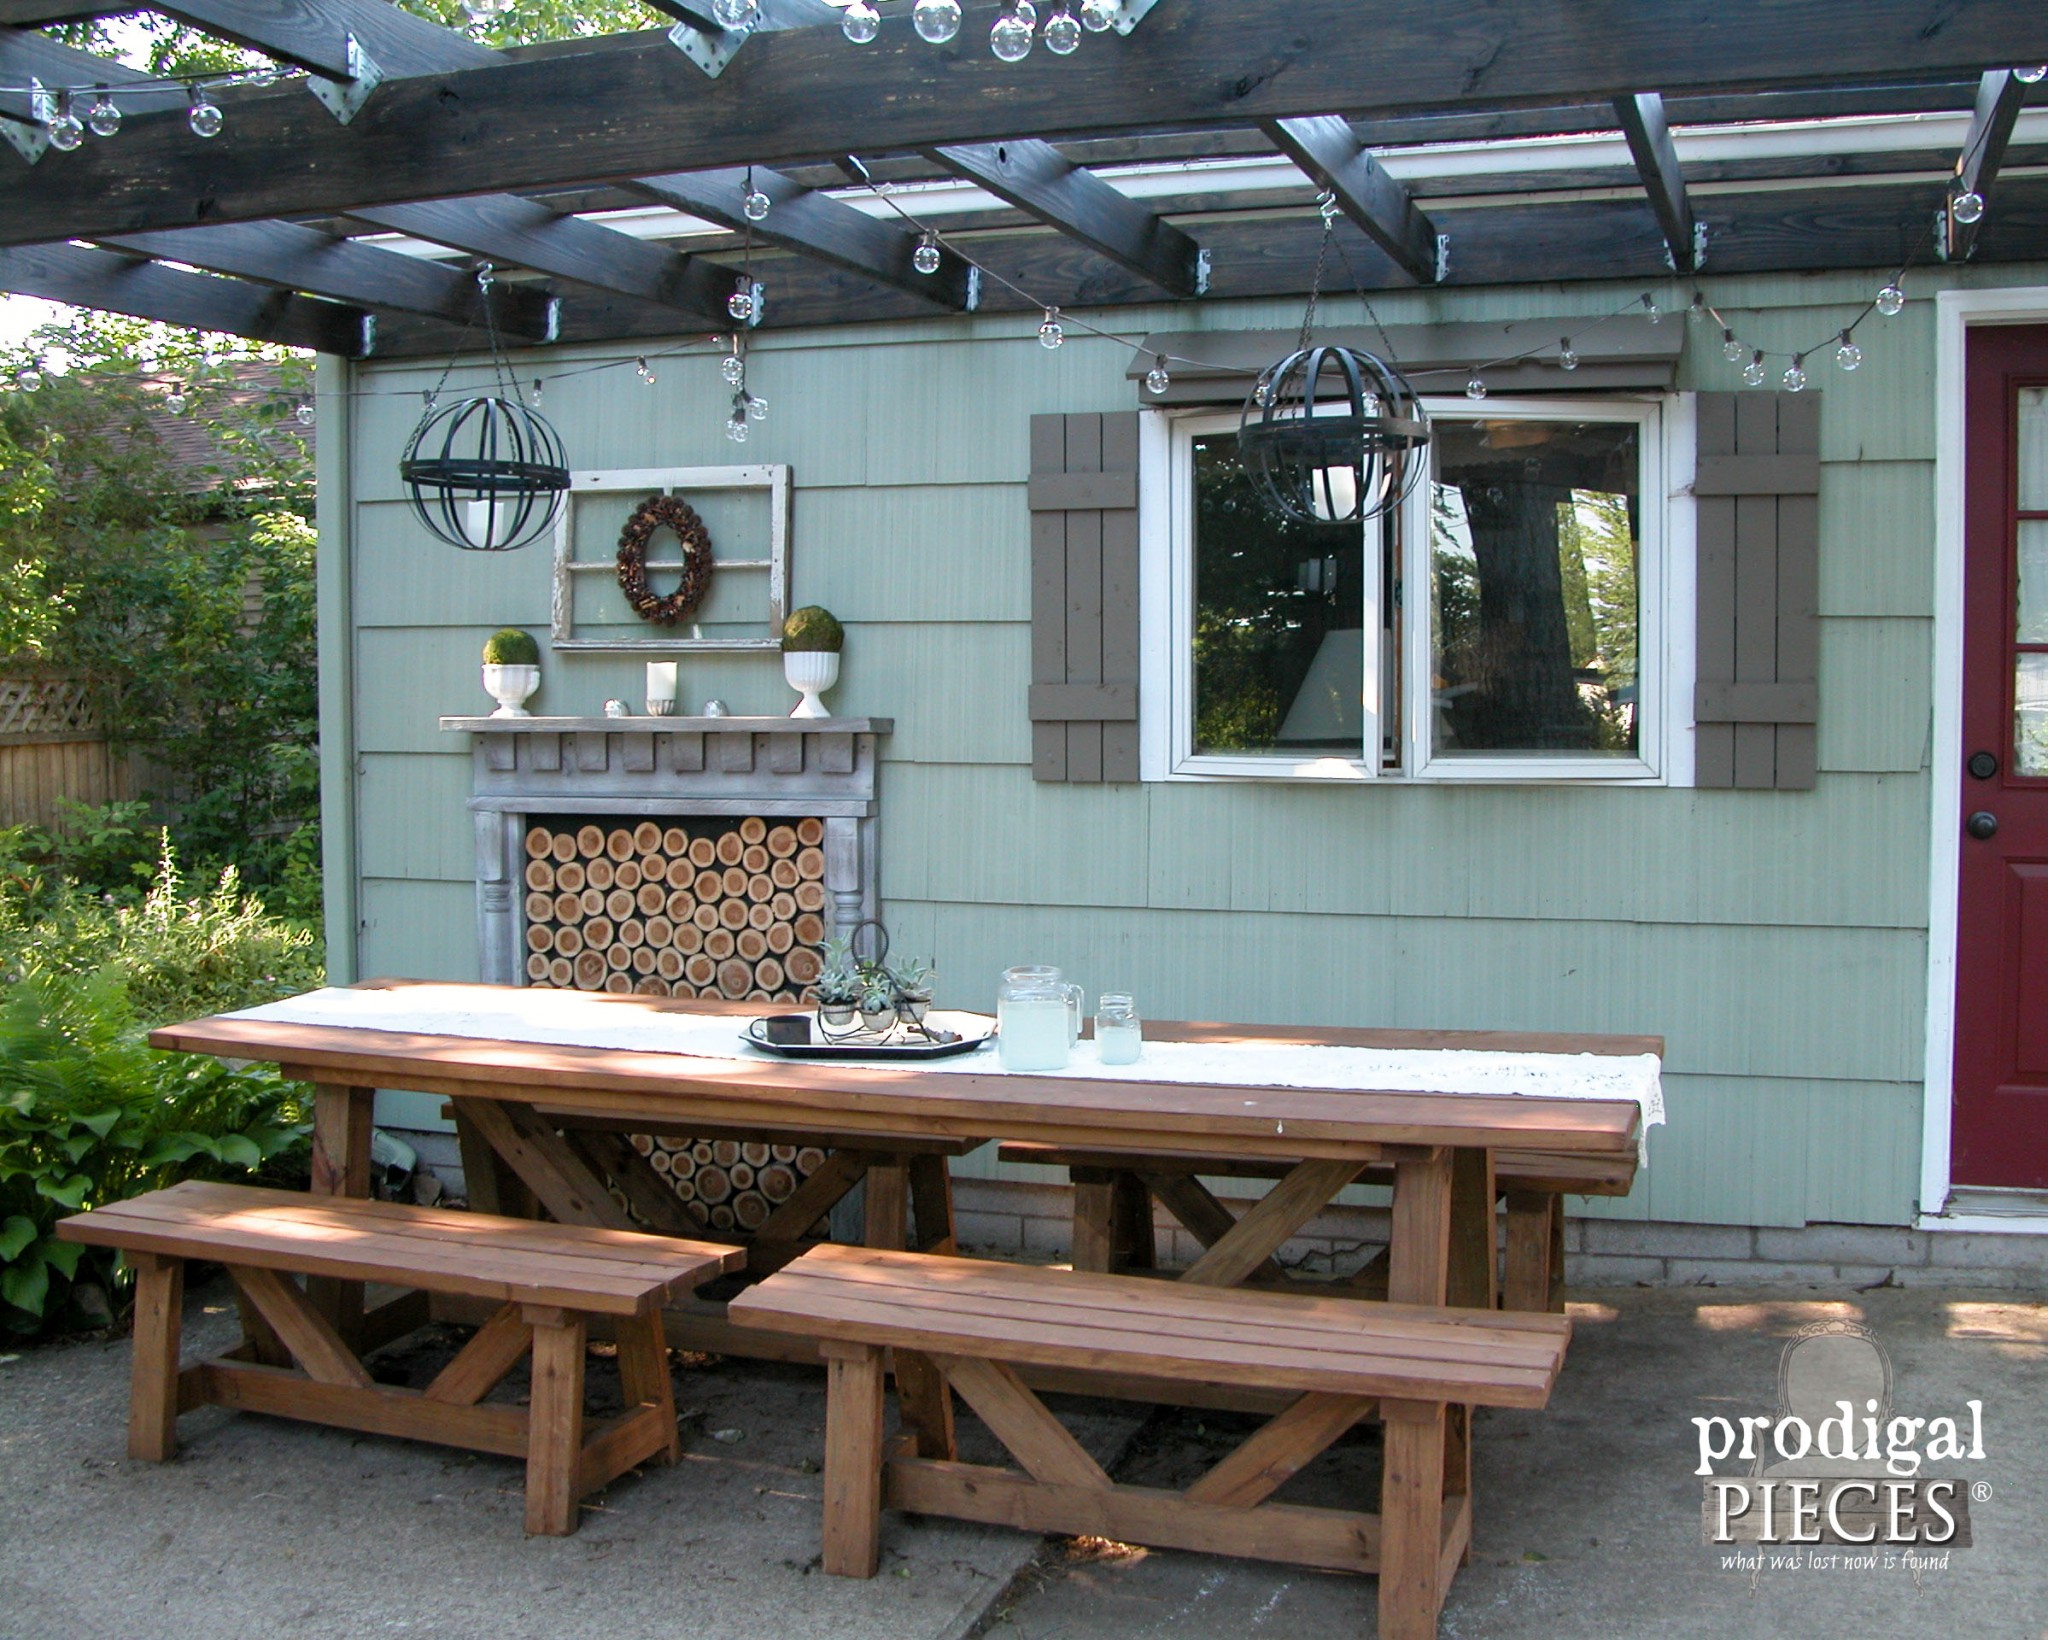 Large Harvest Table with Benches for Patio Dining | Prodigal Pieces | www.prodigalpieces.com